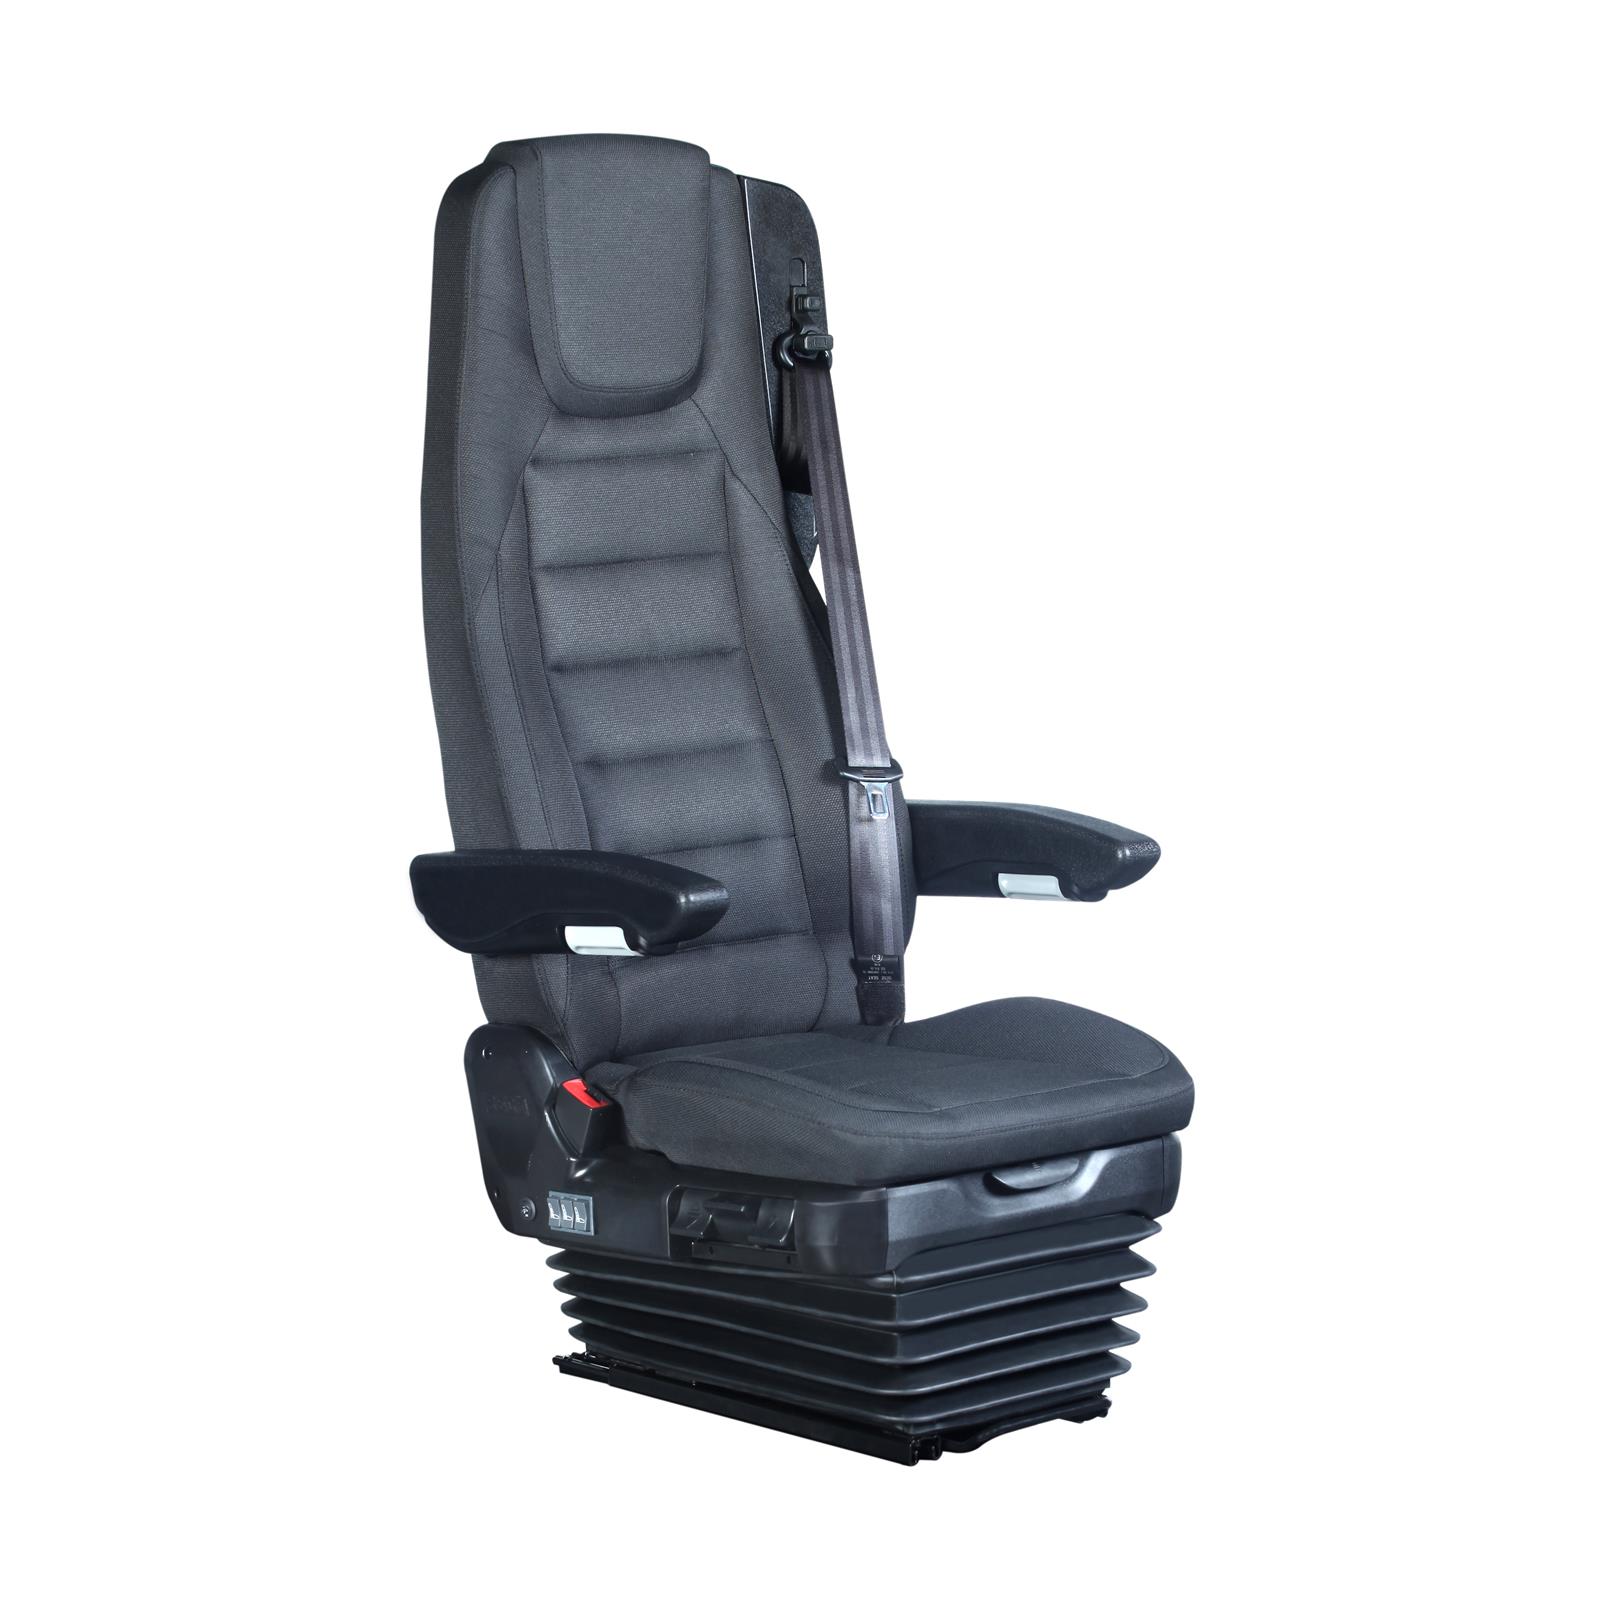 Truck Driver Seats - Supplier, Affordable, Custom Made